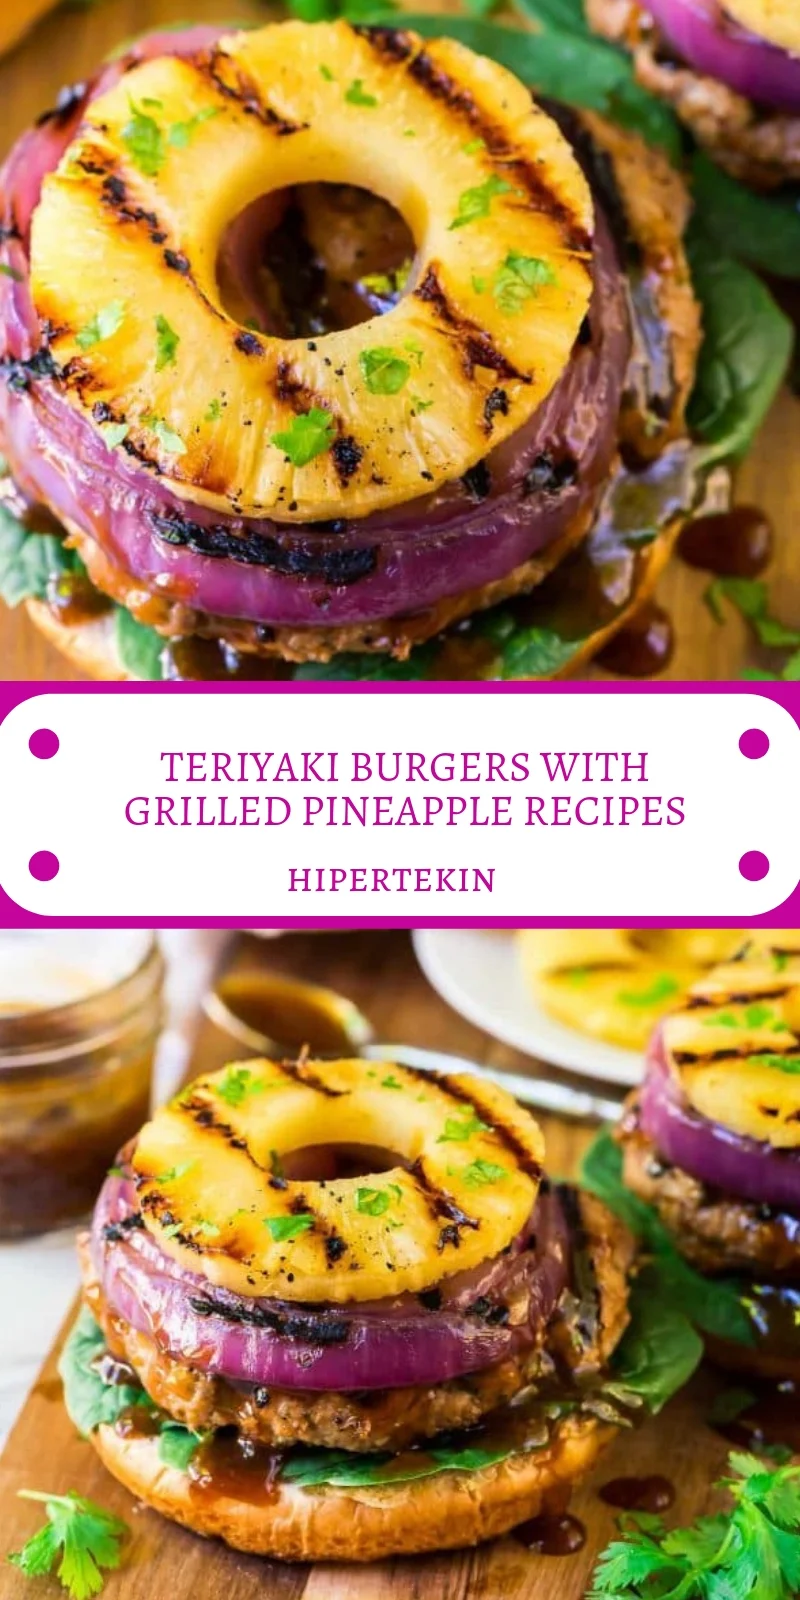 TERIYAKI BURGERS WITH GRILLED PINEAPPLE RECIPES